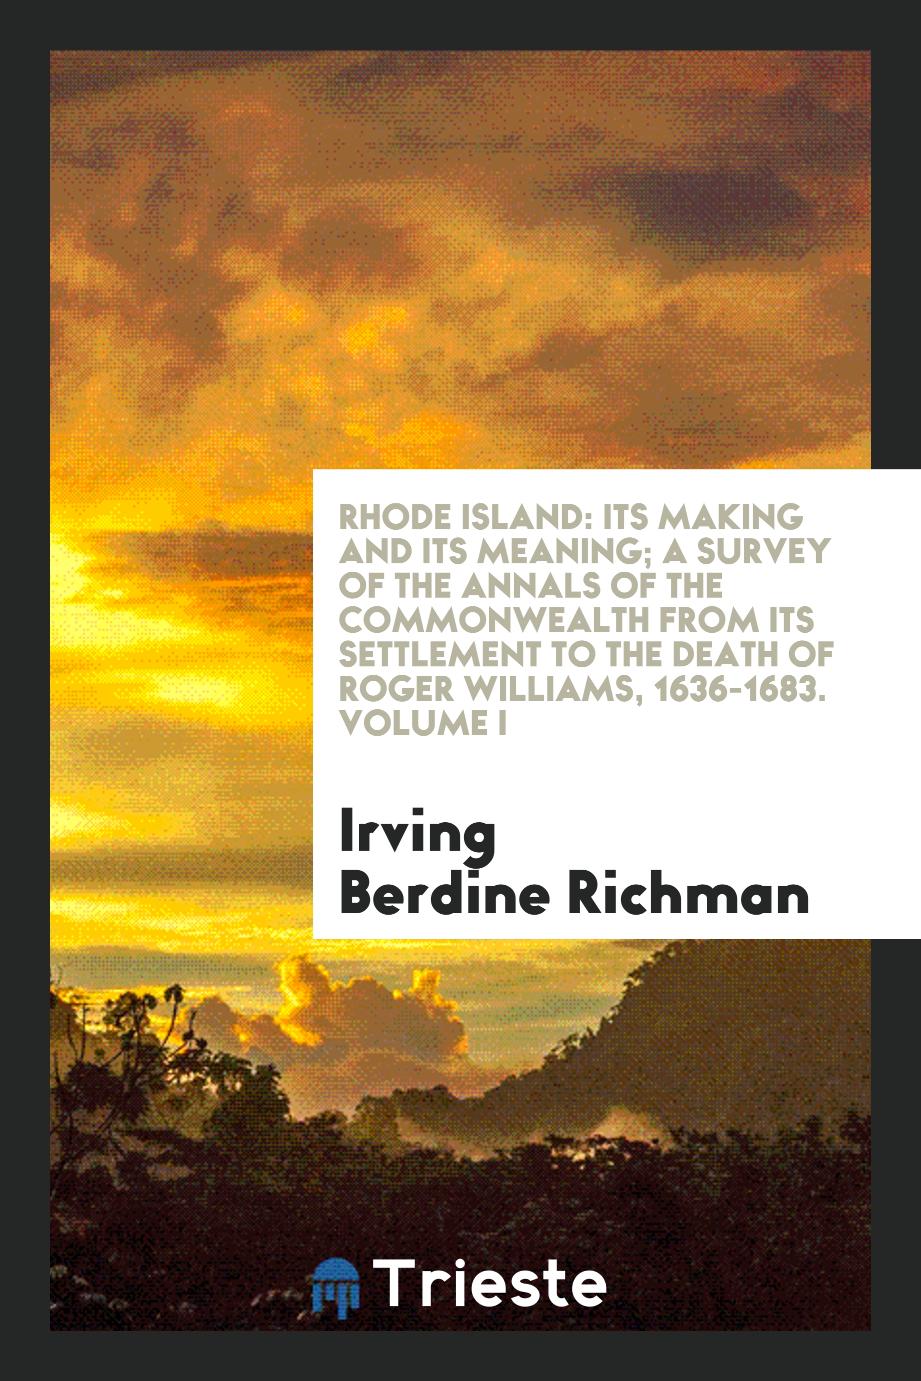 Rhode Island: Its Making and Its Meaning; A Survey of the Annals of the Commonwealth from Its Settlement to the Death of Roger Williams, 1636-1683. Volume I